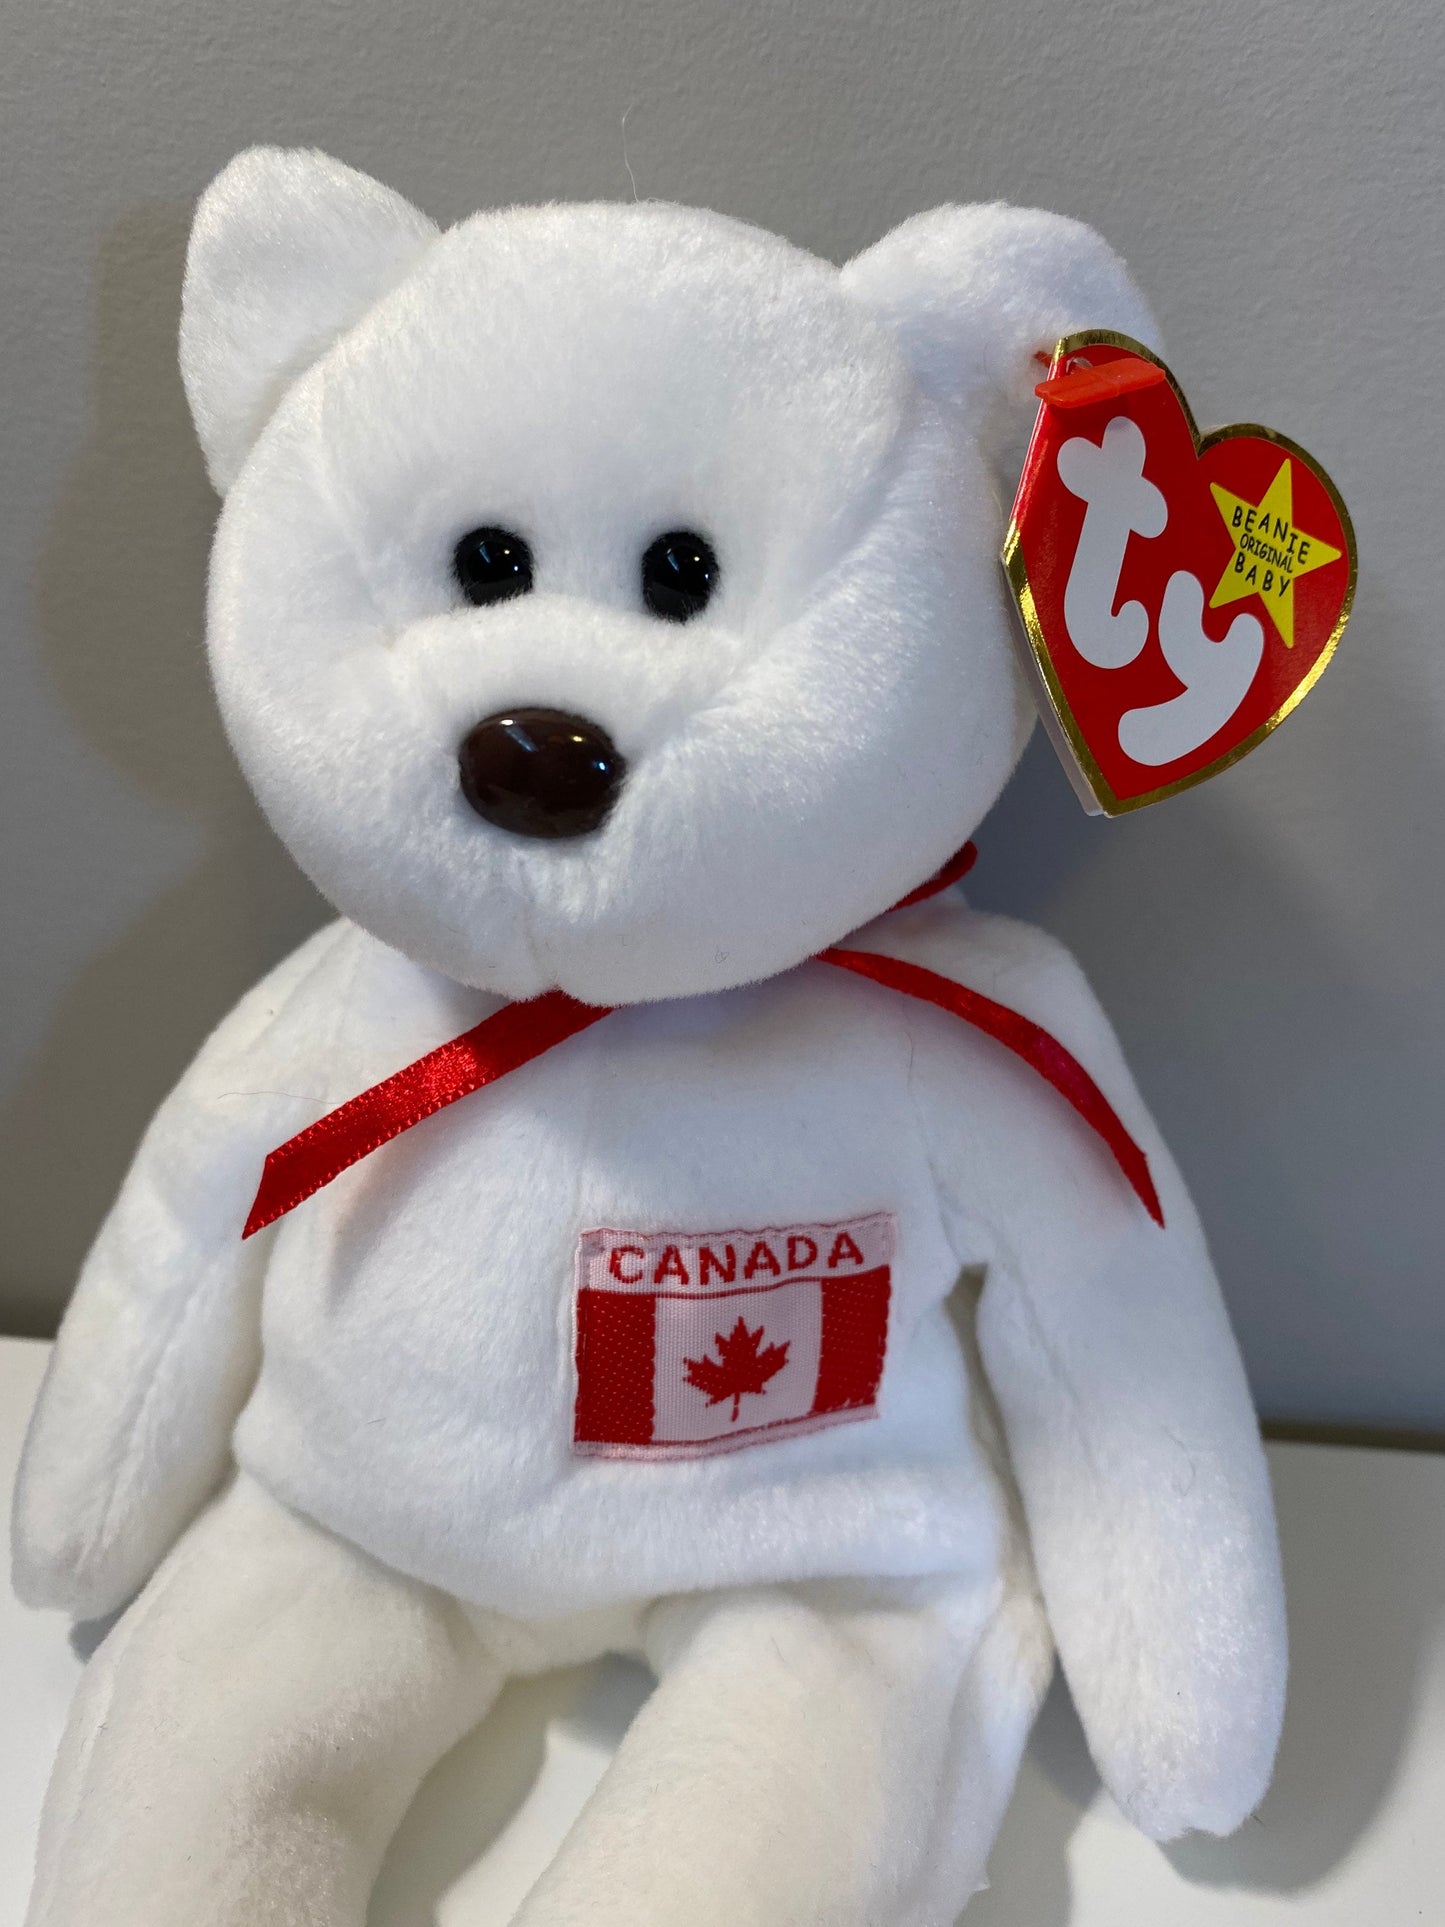 Ty Beanie Baby “Maple” the Canadian Bear - Canada Exclusive! (8.5 inch)